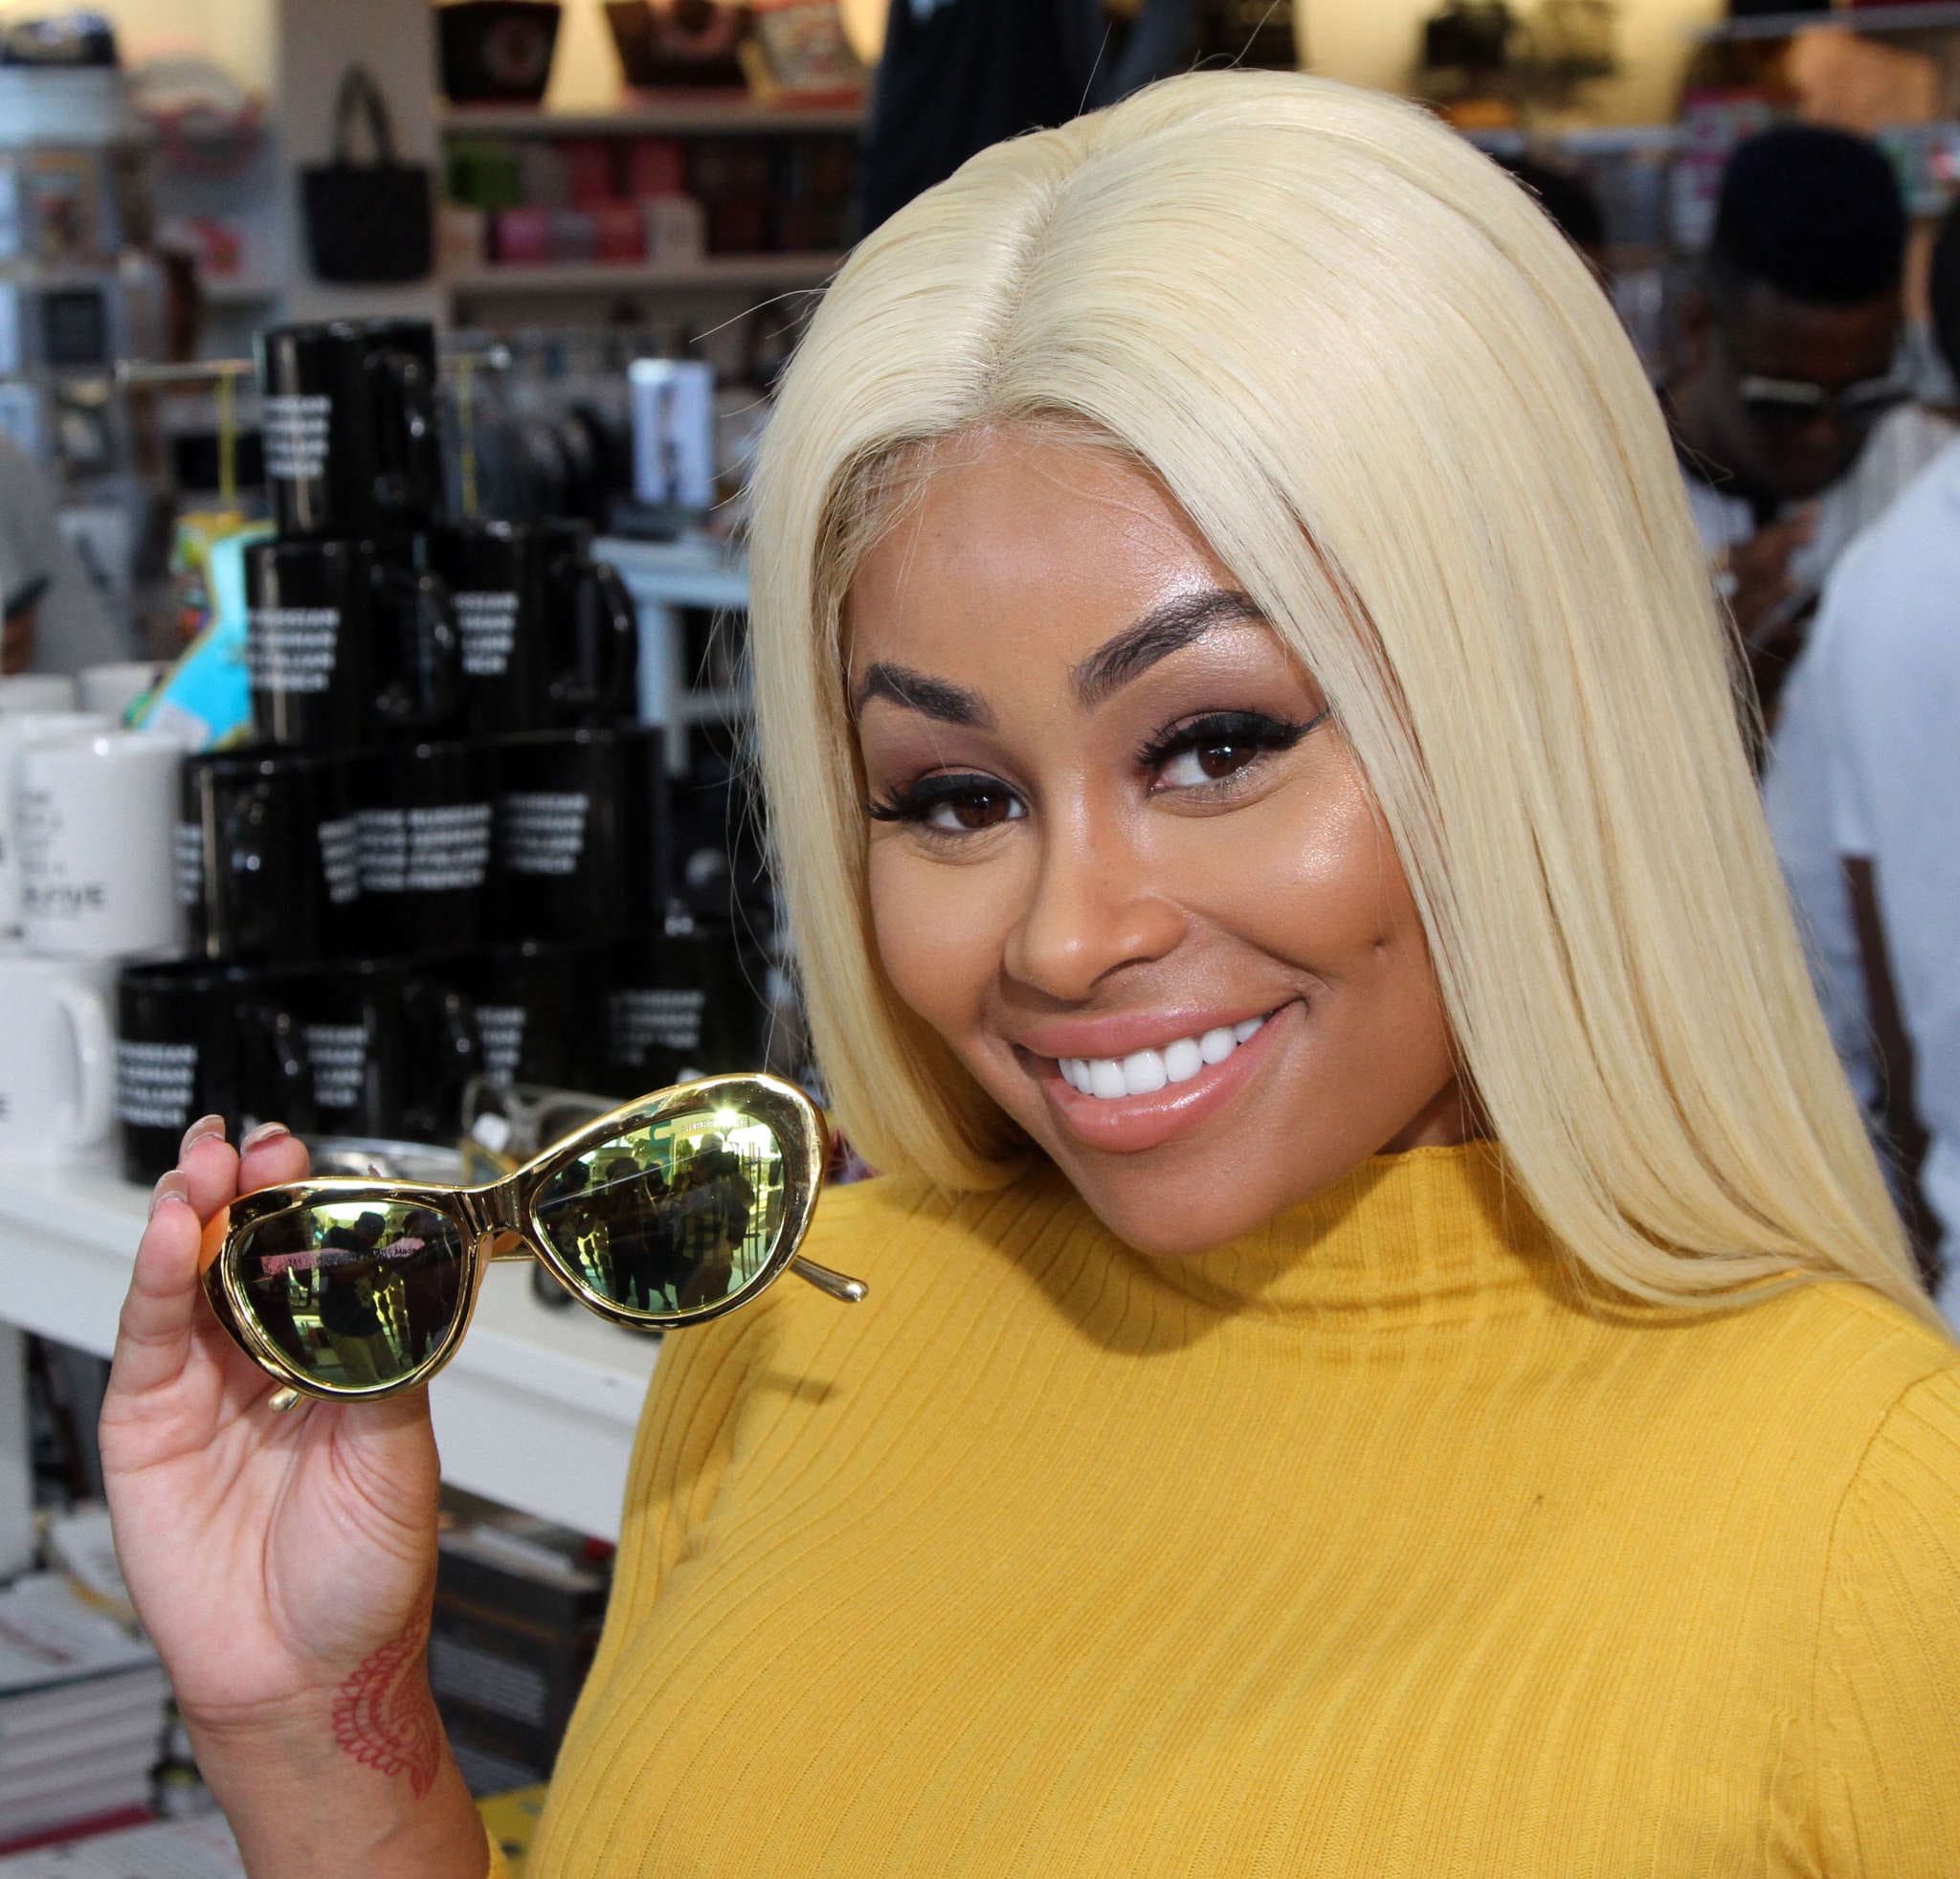 Blac Chyna Shares Bedroom Dealbreakers In The New Episode Of 'The Real Blac Chyna'